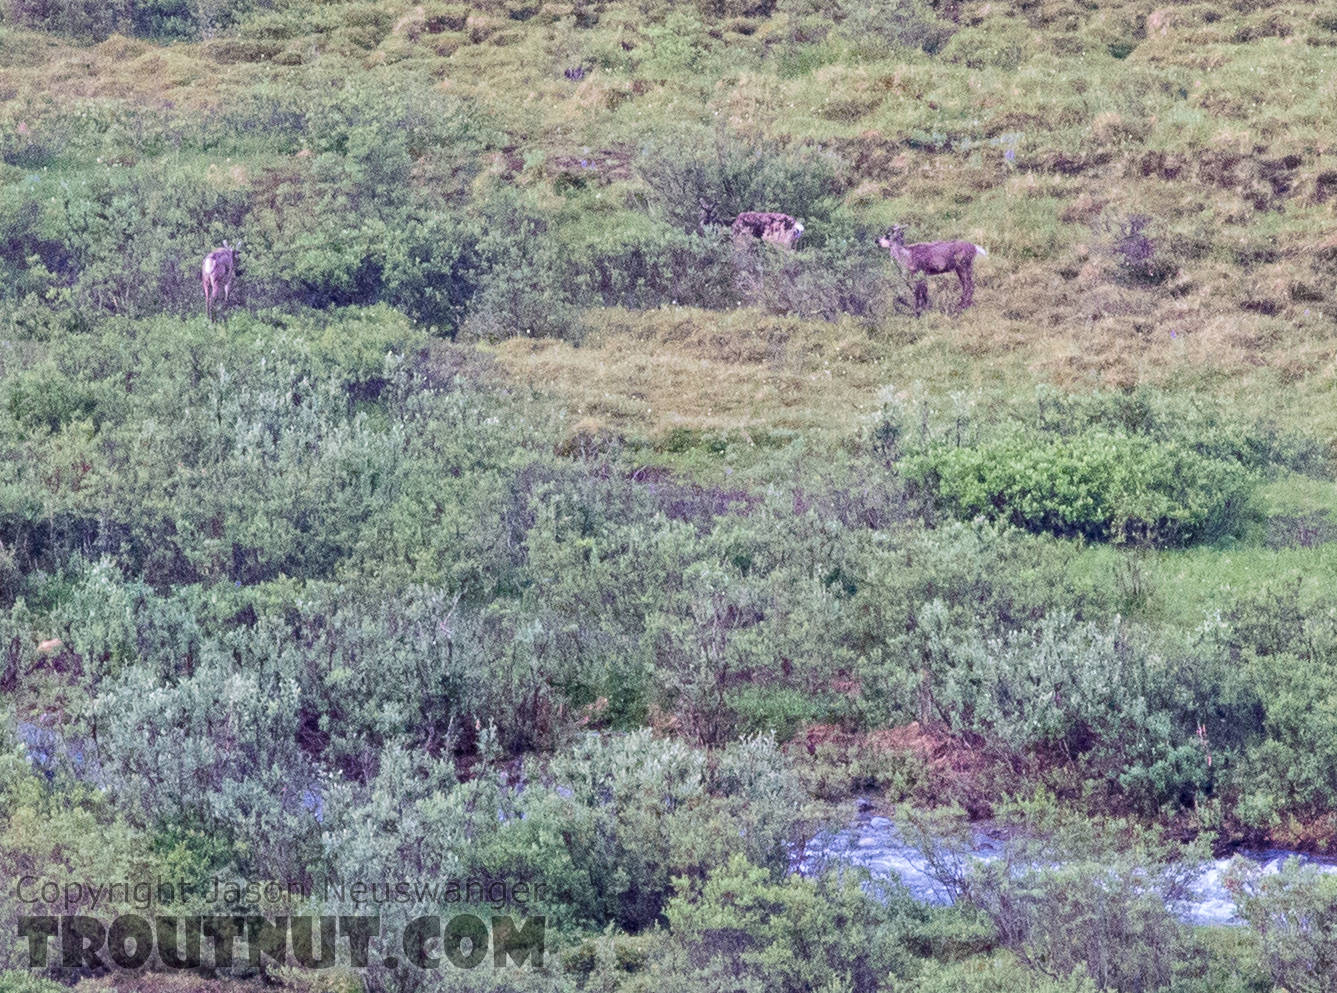 Cow caribou (middle) and 2 calves From the South Fork of Pass Creek in Alaska.